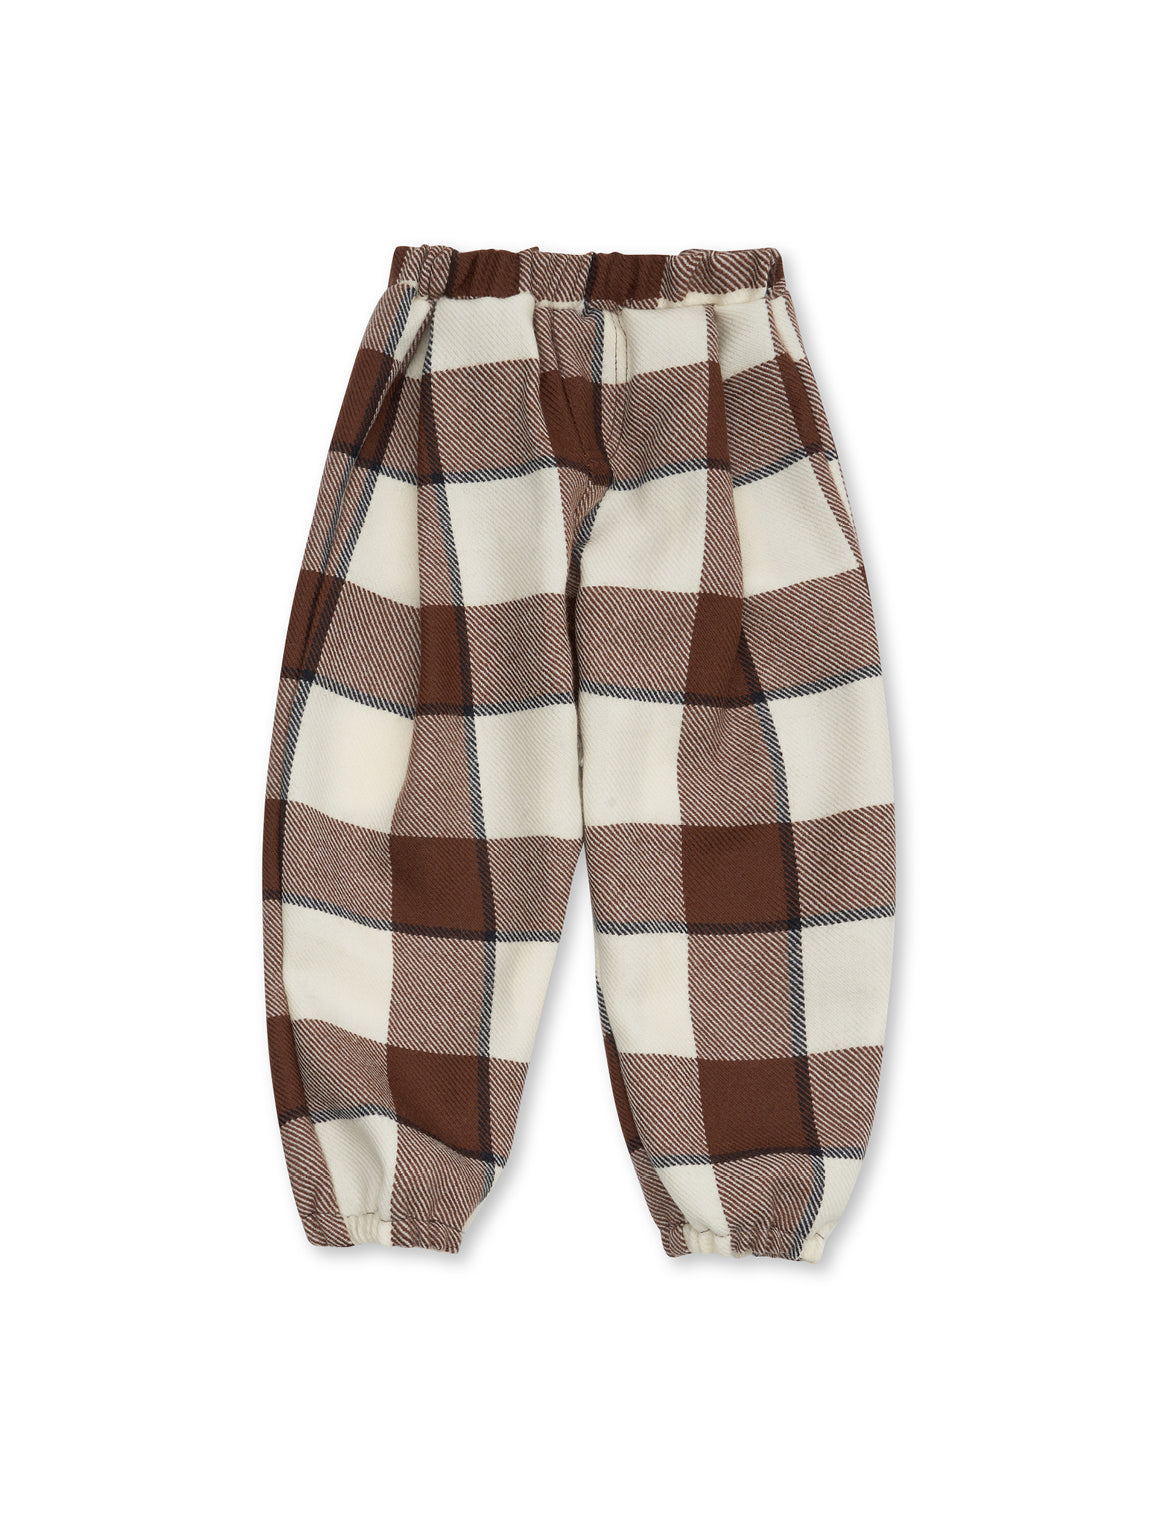 Boys' Designer Pants, brown check, wool, ages 1 to 6.